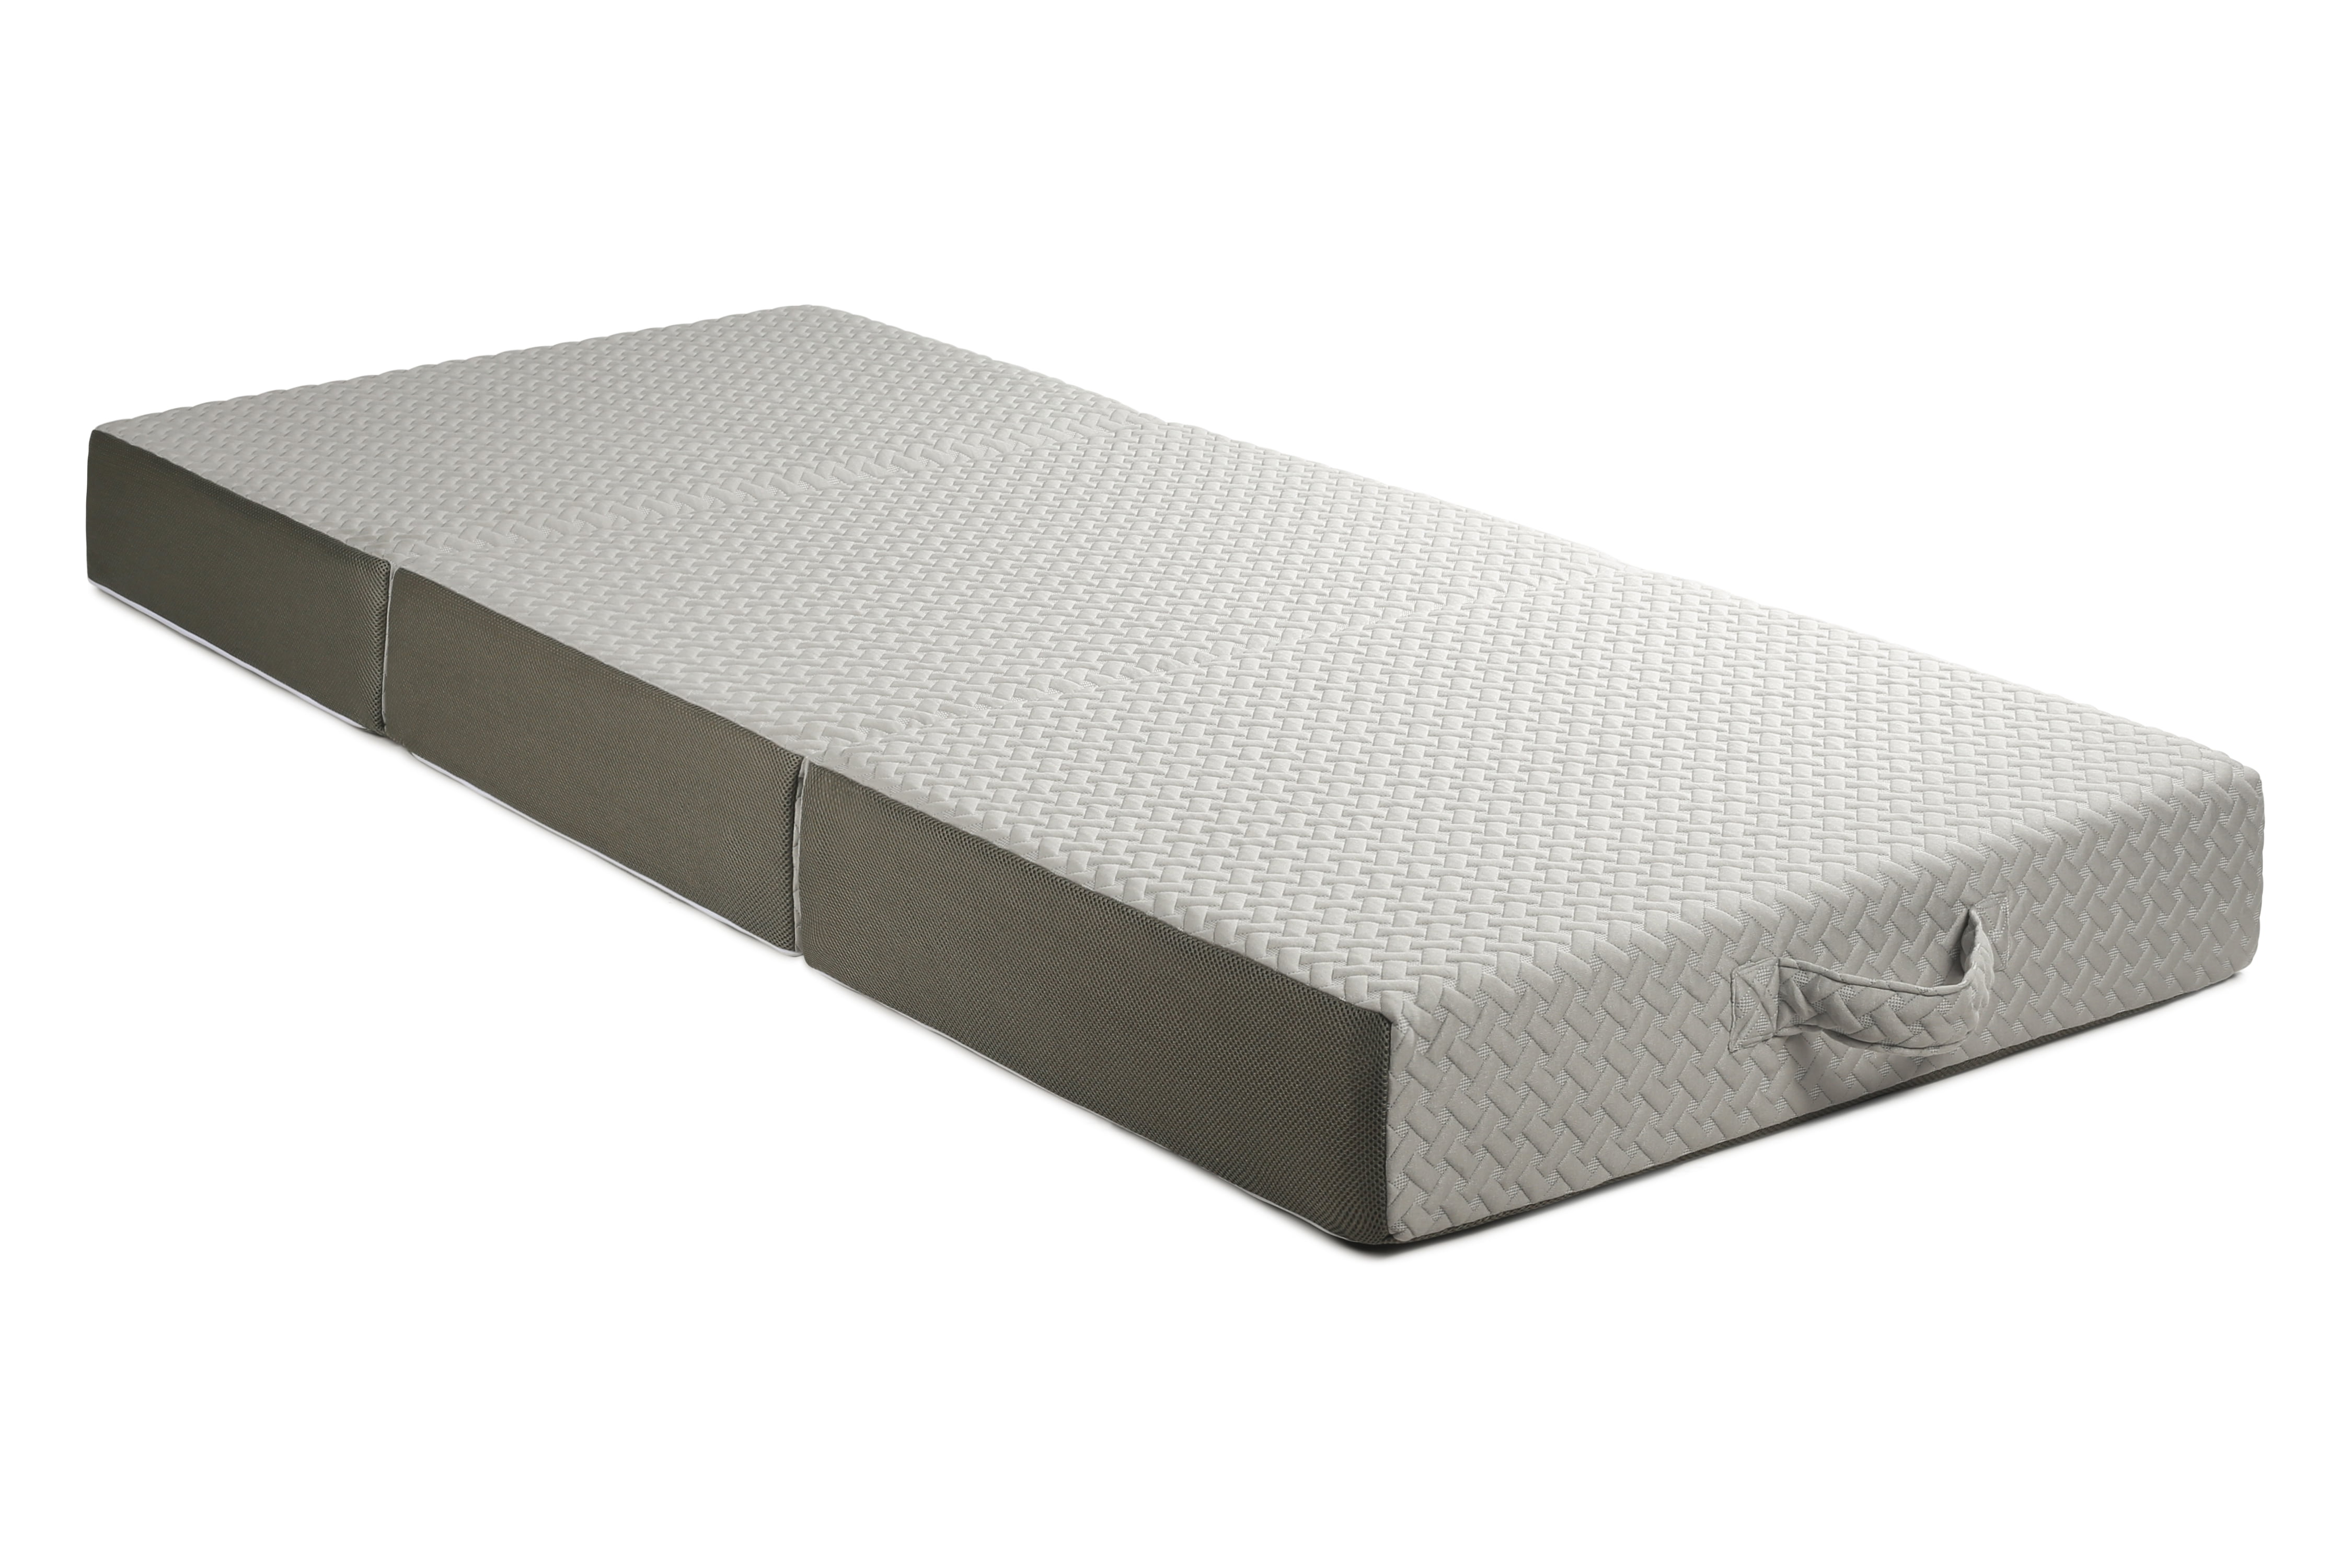 Milliard 6-Inch Memory Foam Tri Folding Mattress with Ultra Soft Removable Cover and Non-Slip Bottom (75 inches x 31 inches)